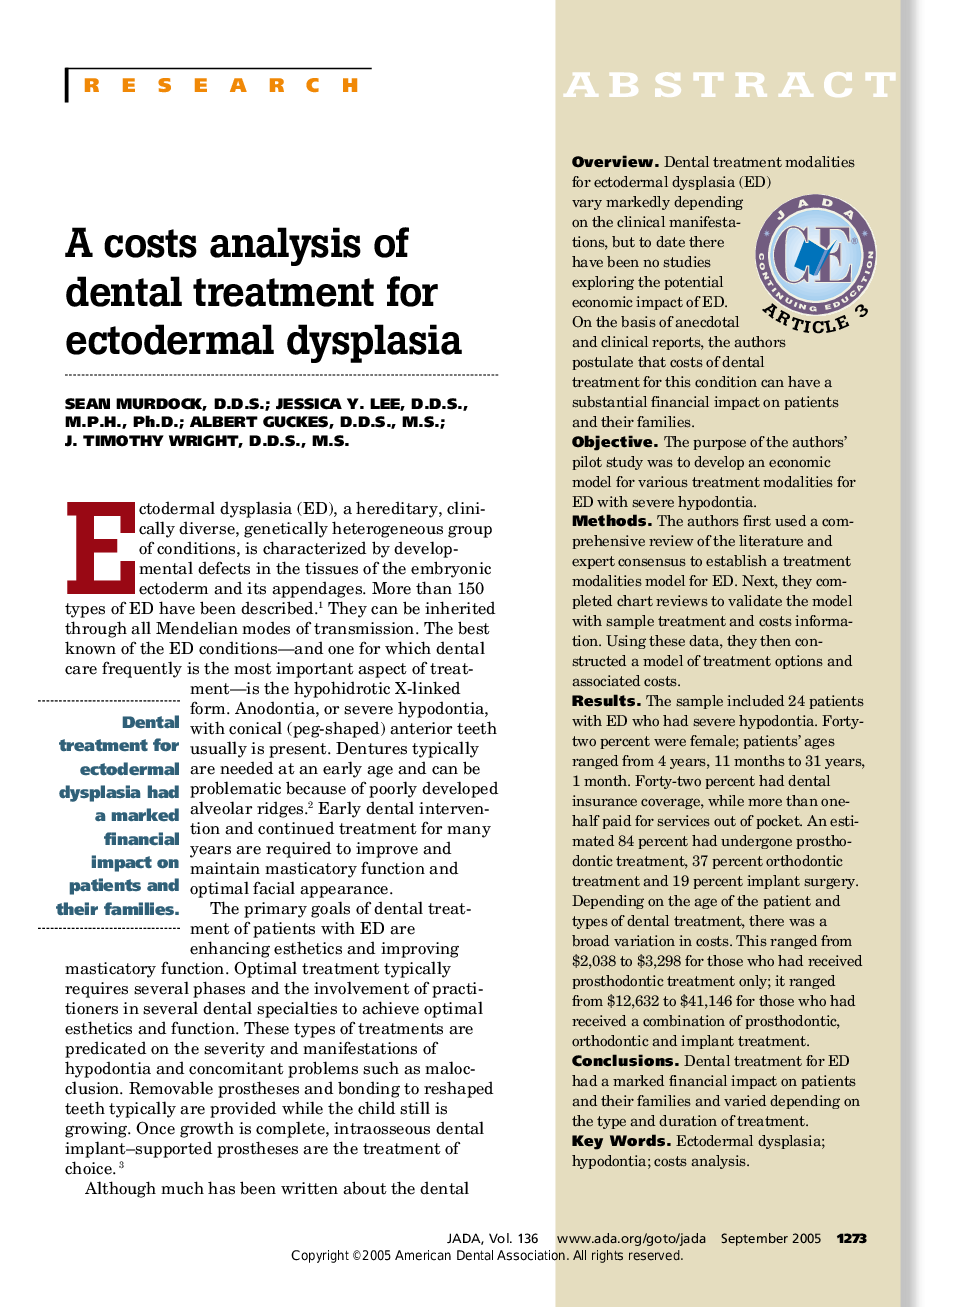 A costs analysis of dental treatment for ectodermal dysplasia